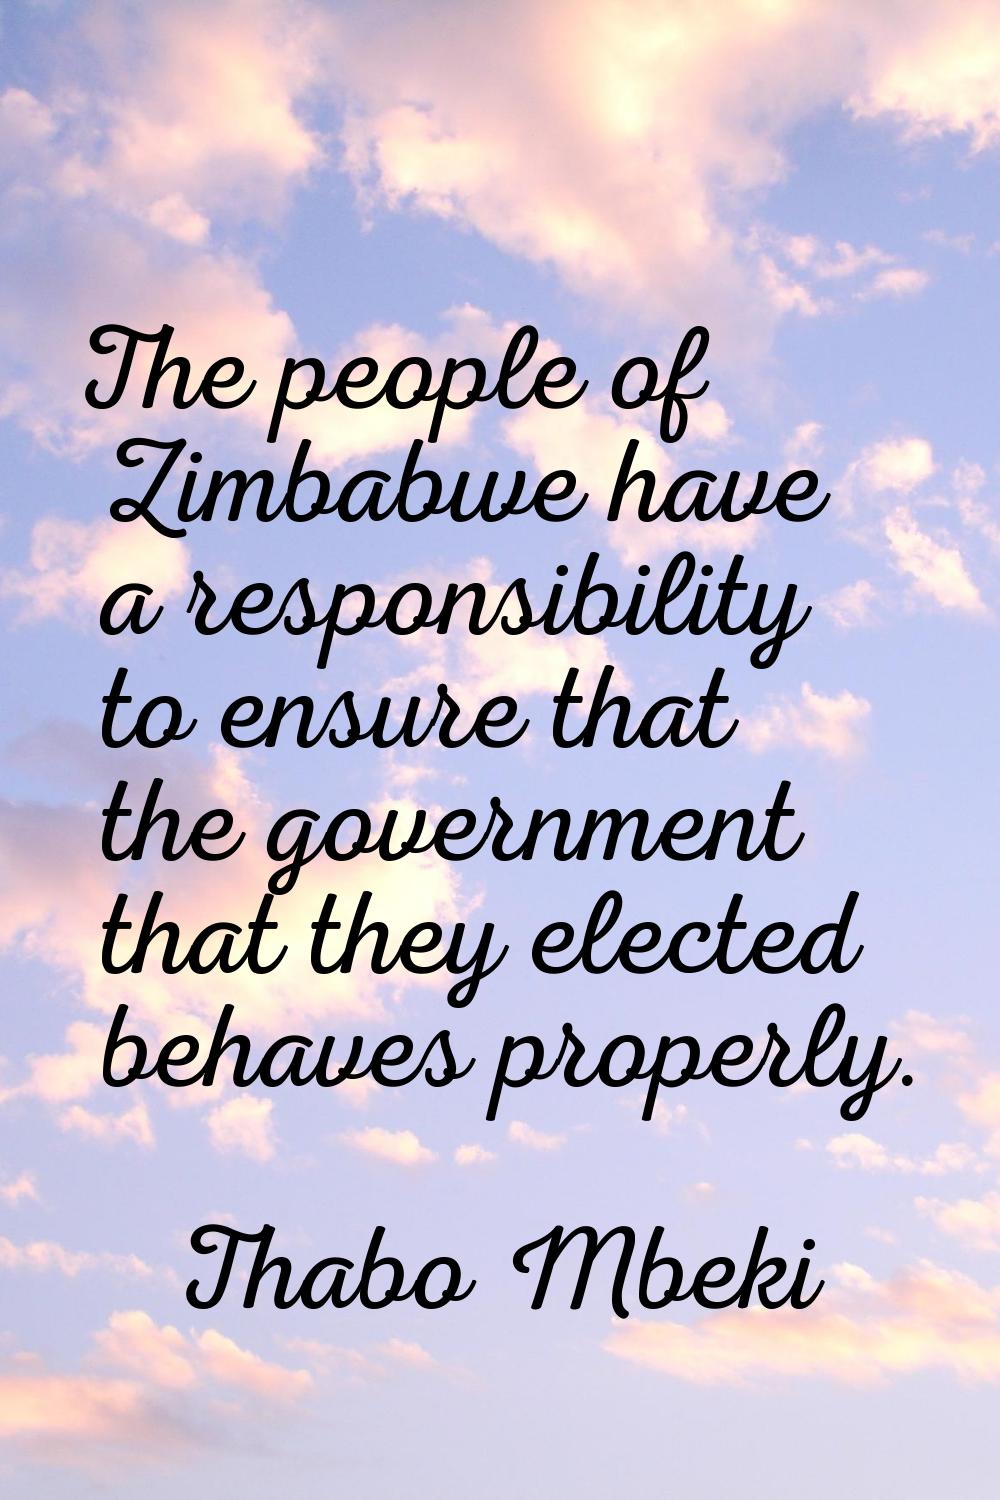 The people of Zimbabwe have a responsibility to ensure that the government that they elected behave